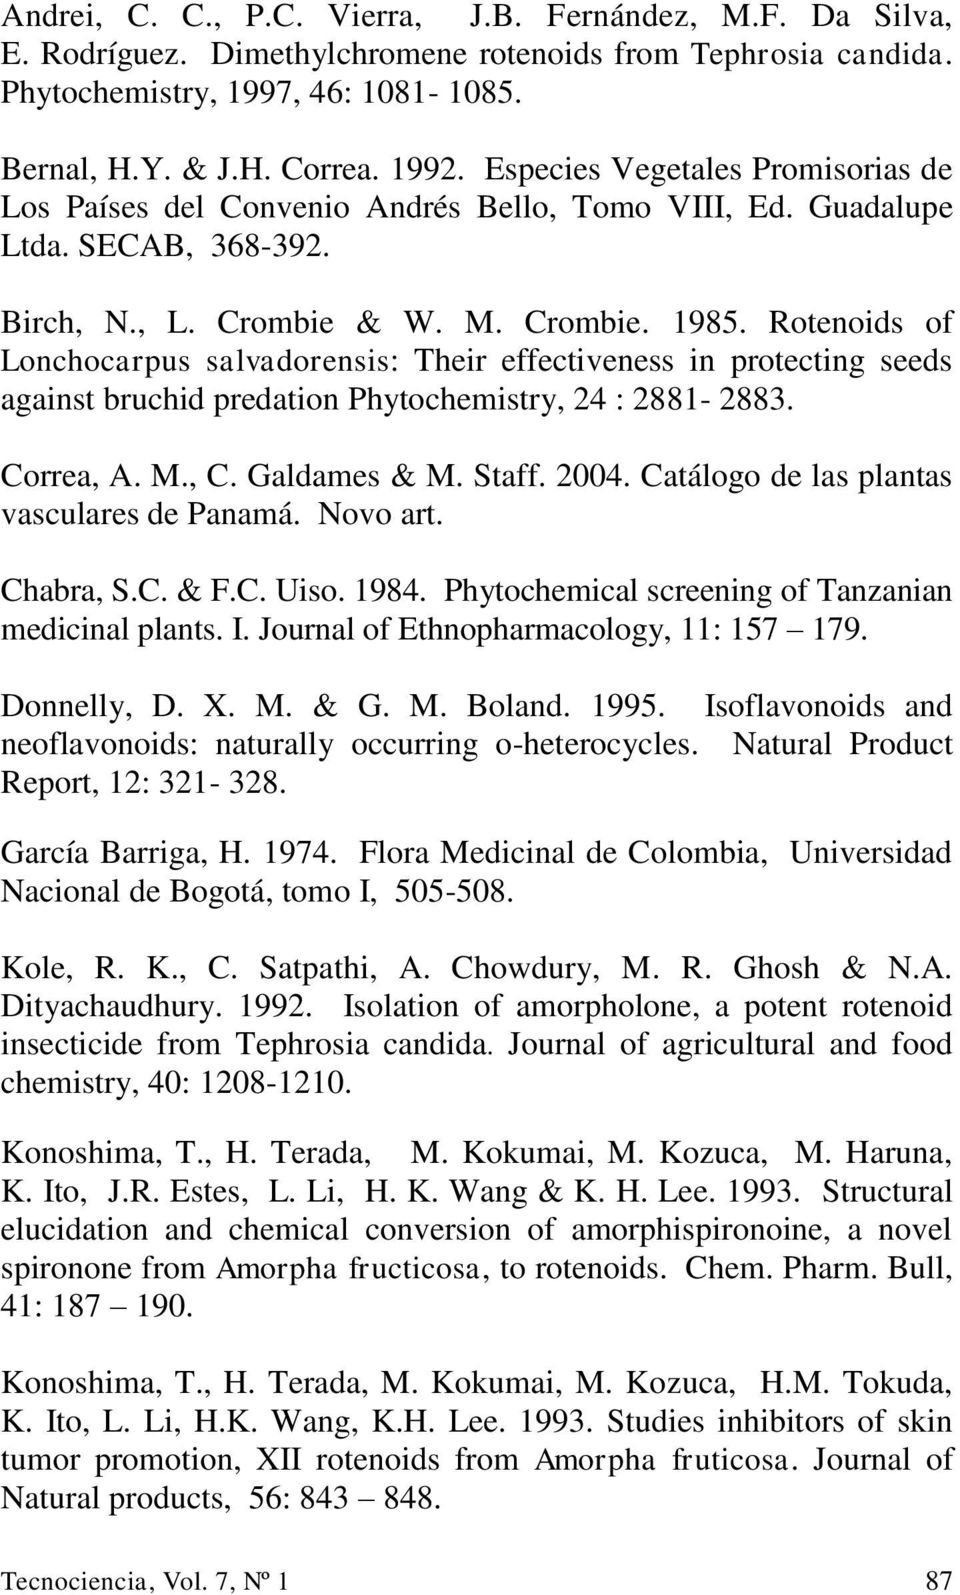 Rotenoids of Lonchocarpus salvadorensis: Their effectiveness in protecting seeds against bruchid predation Phytochemistry, 24 : 2881-2883. Correa, A. M., C. Galdames & M. Staff. 2004.